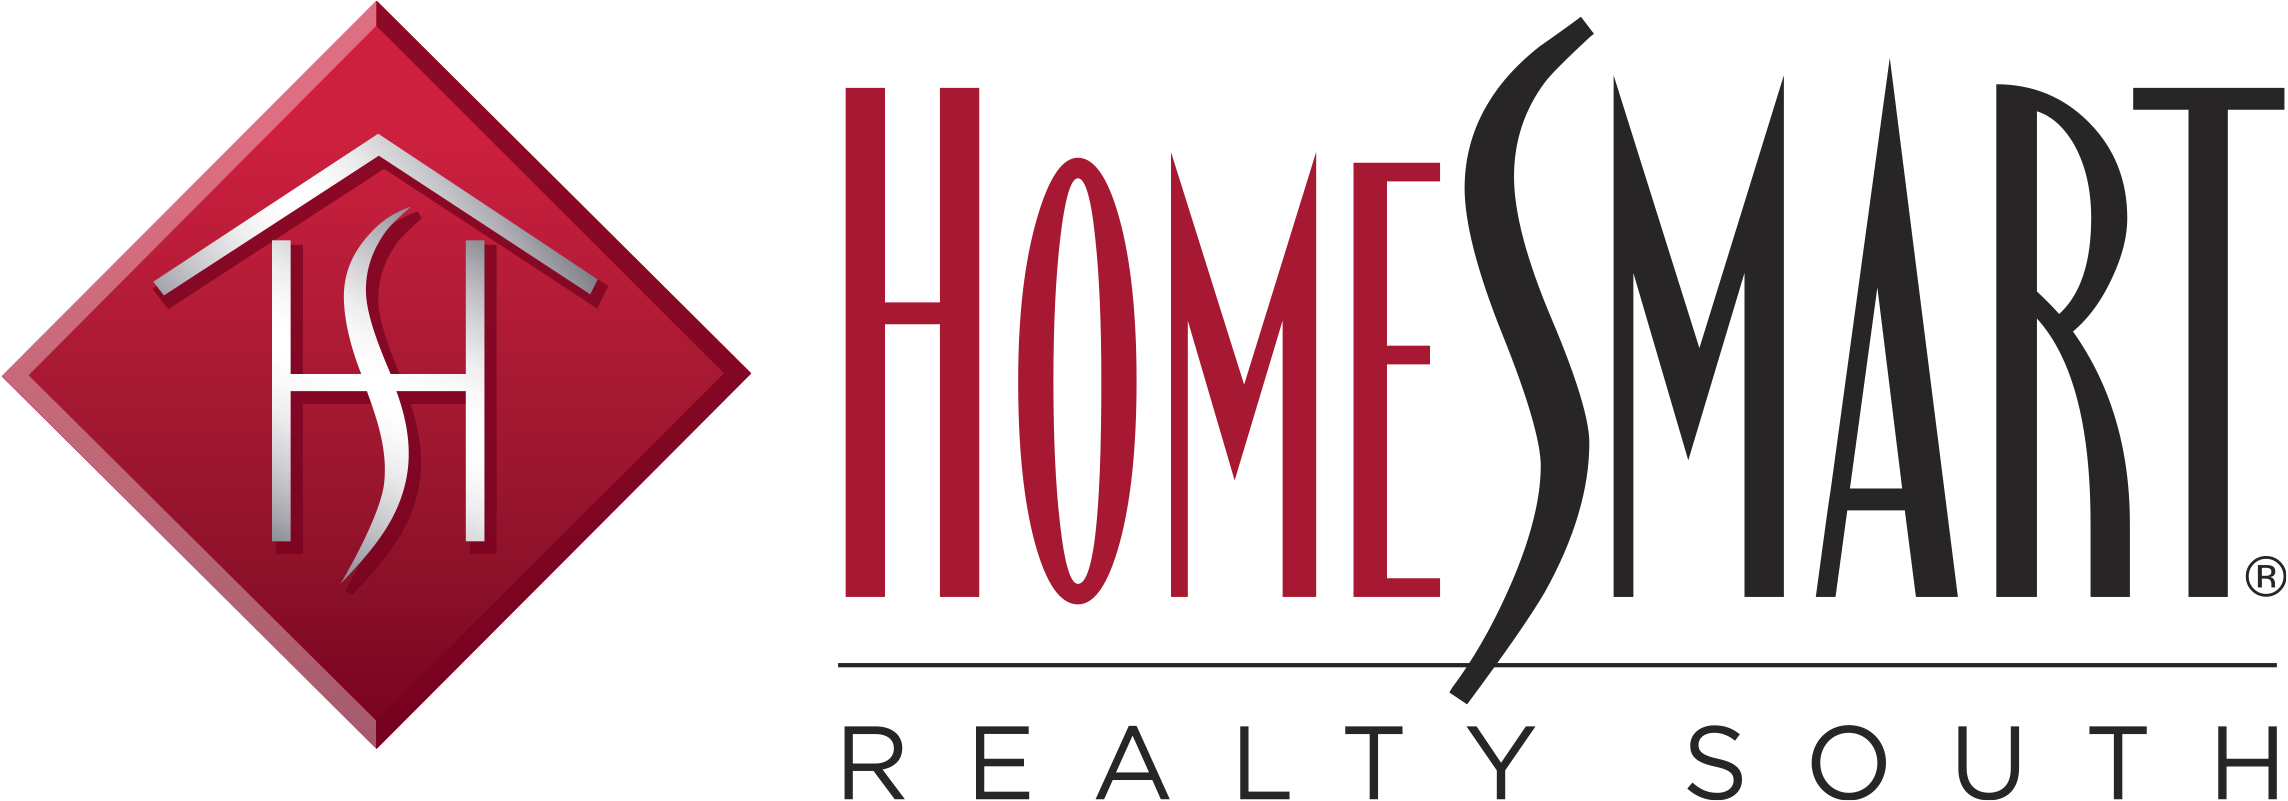 Home Smart Realty South